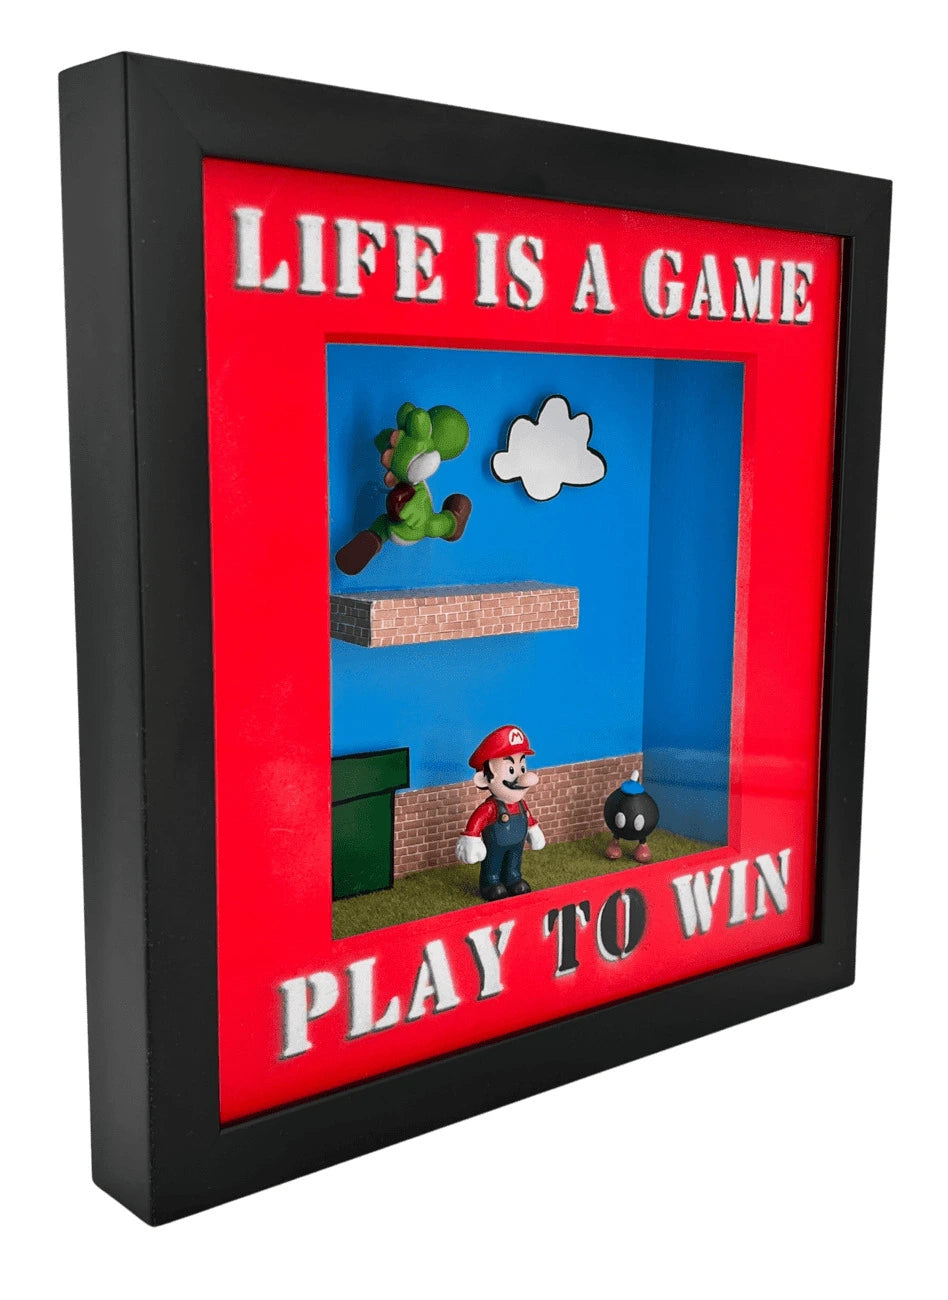 Andreas Lichter - Life is a game, play to win Super Mario gerahmt - Galerie Vogel